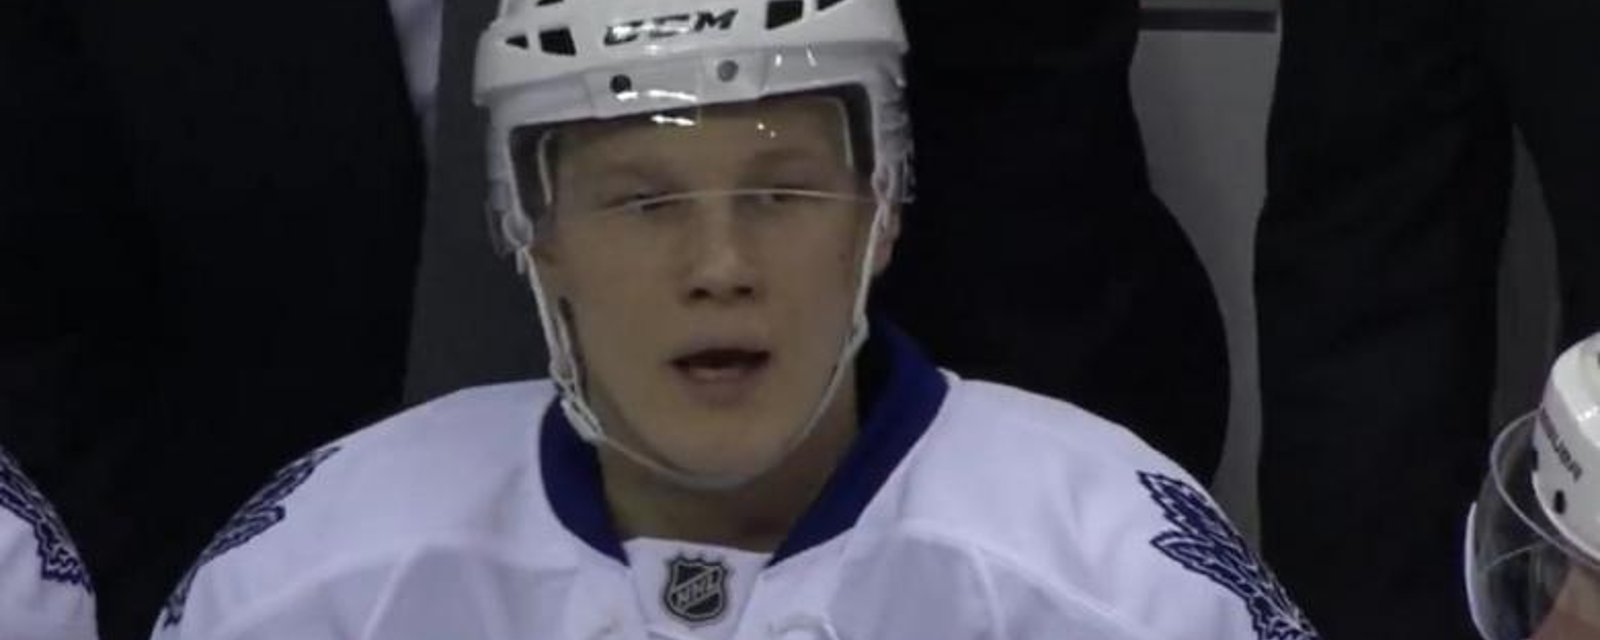 Soshnikov scores his first career goal and he is pumped!